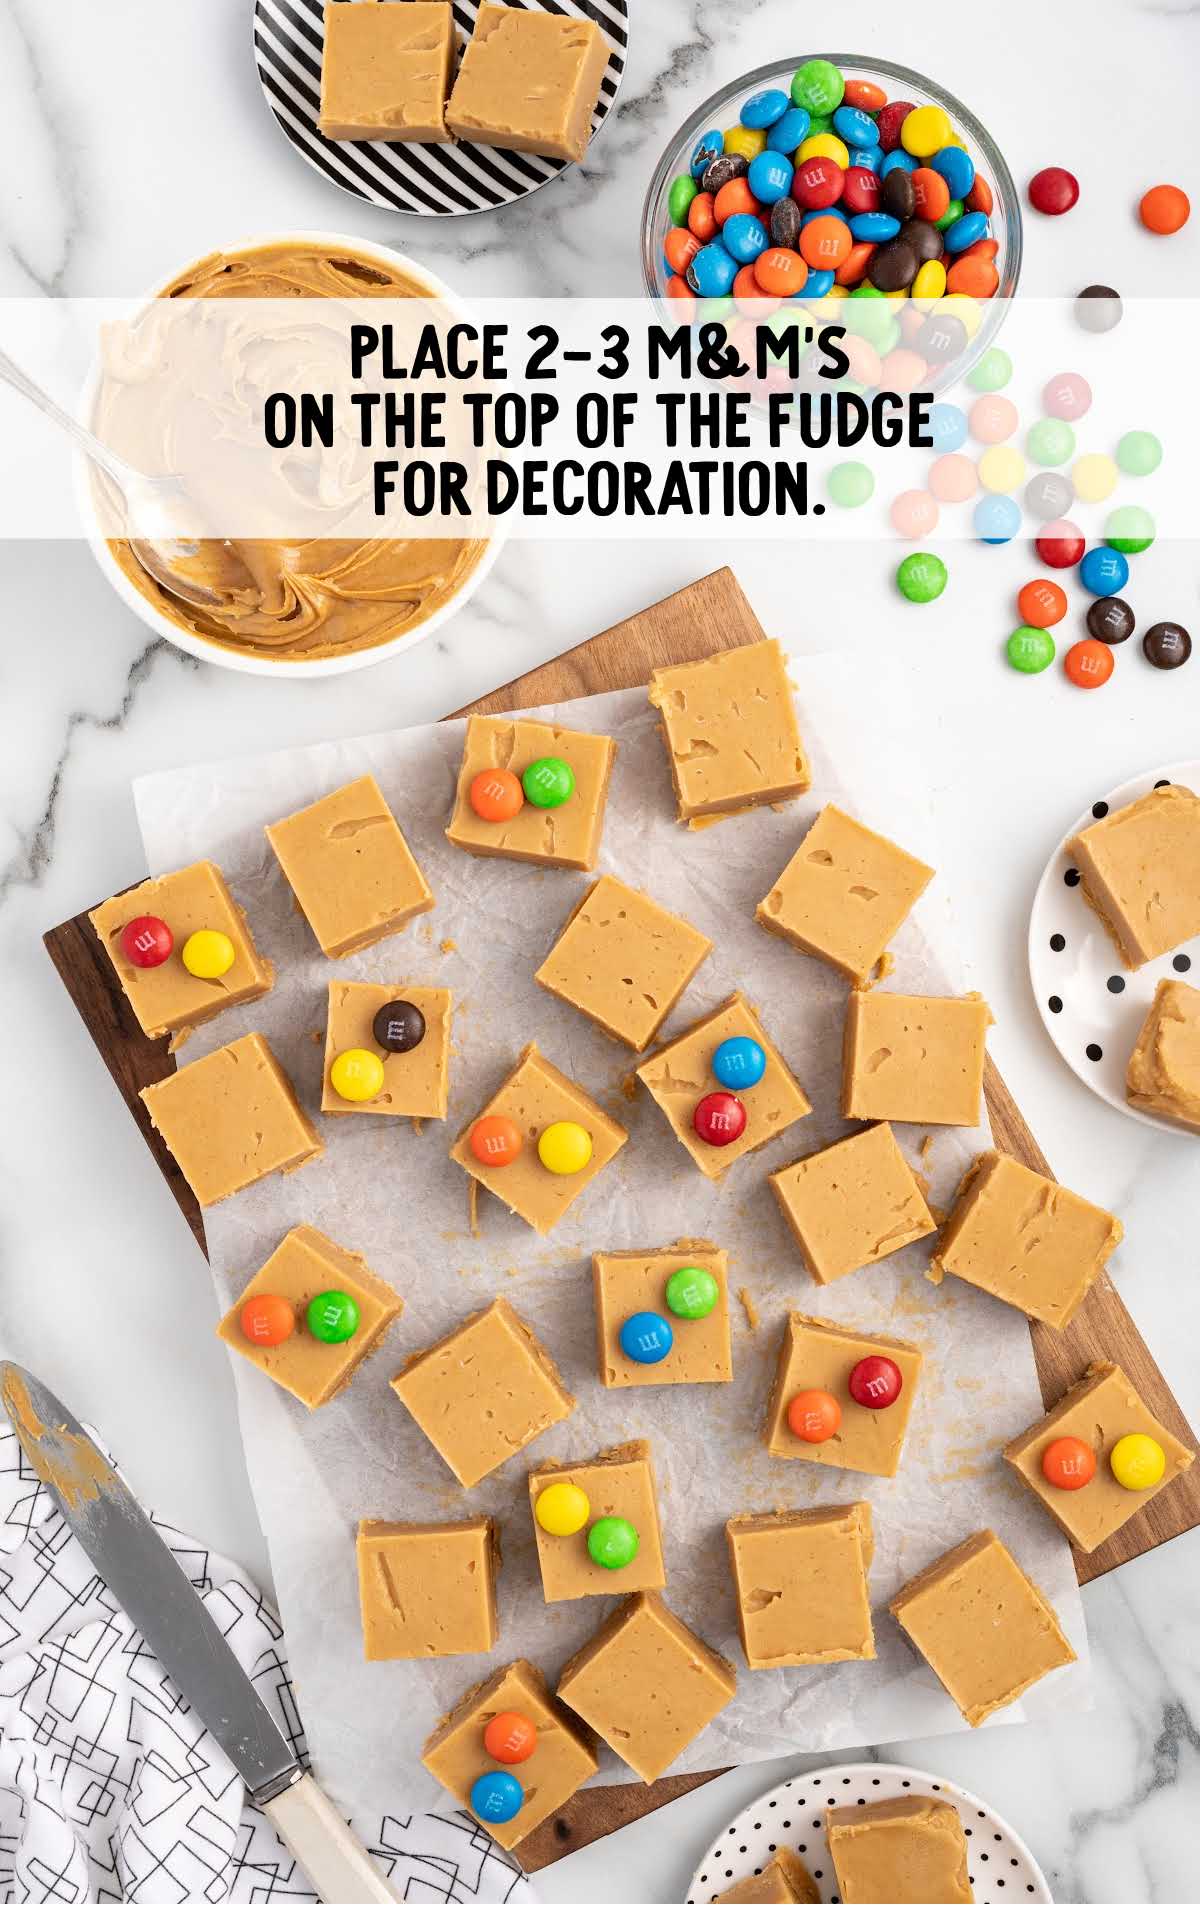 m&ms added on top of the peanut butter fudge